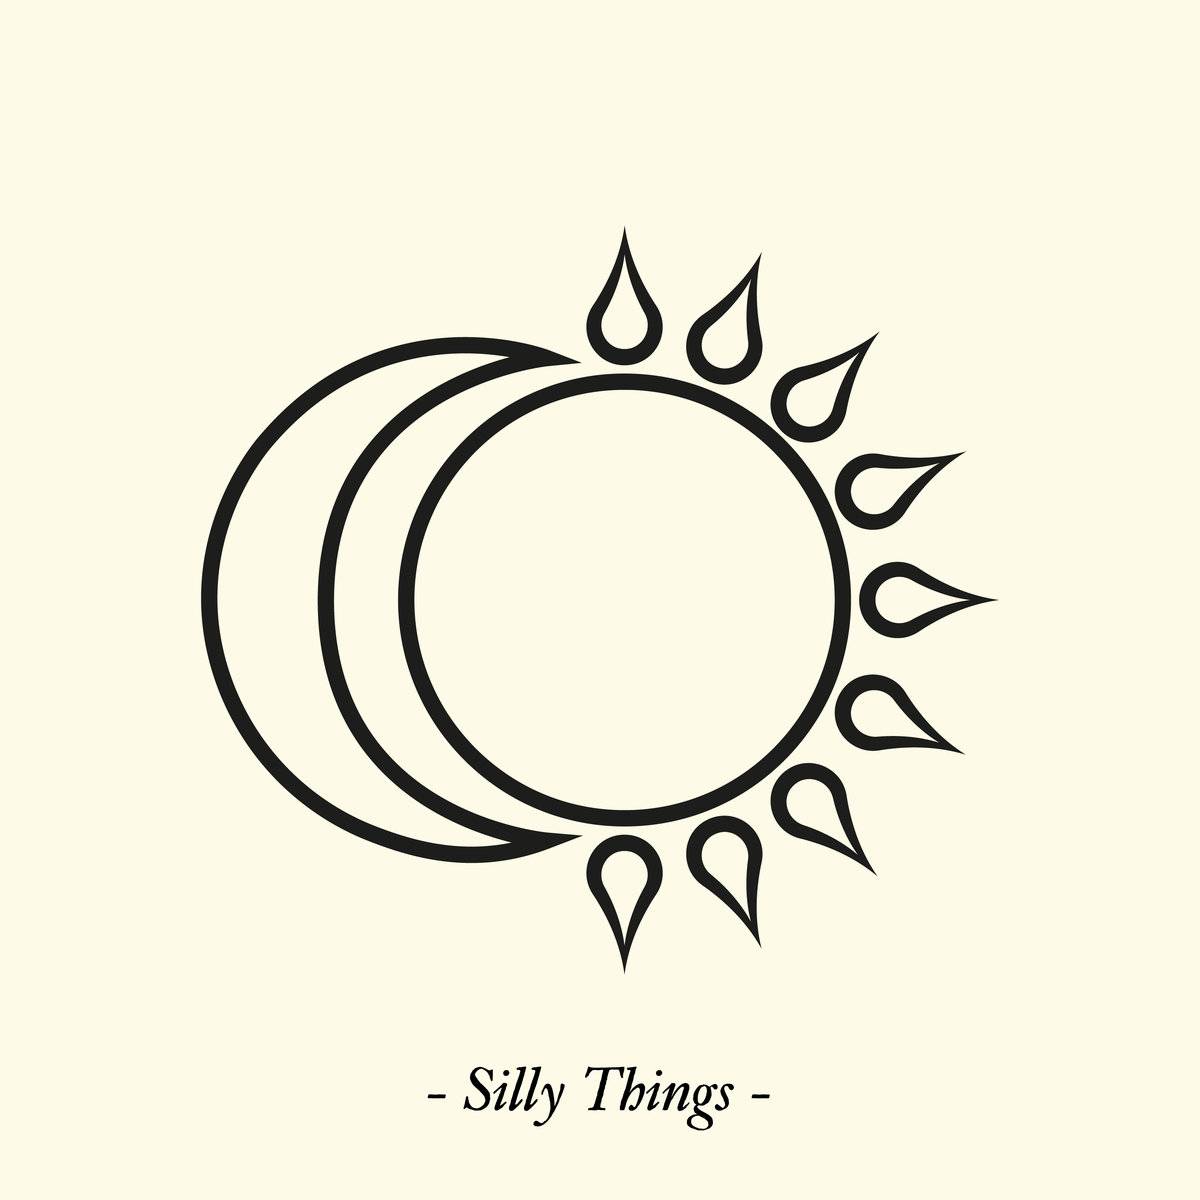 Silly things. Silly thing